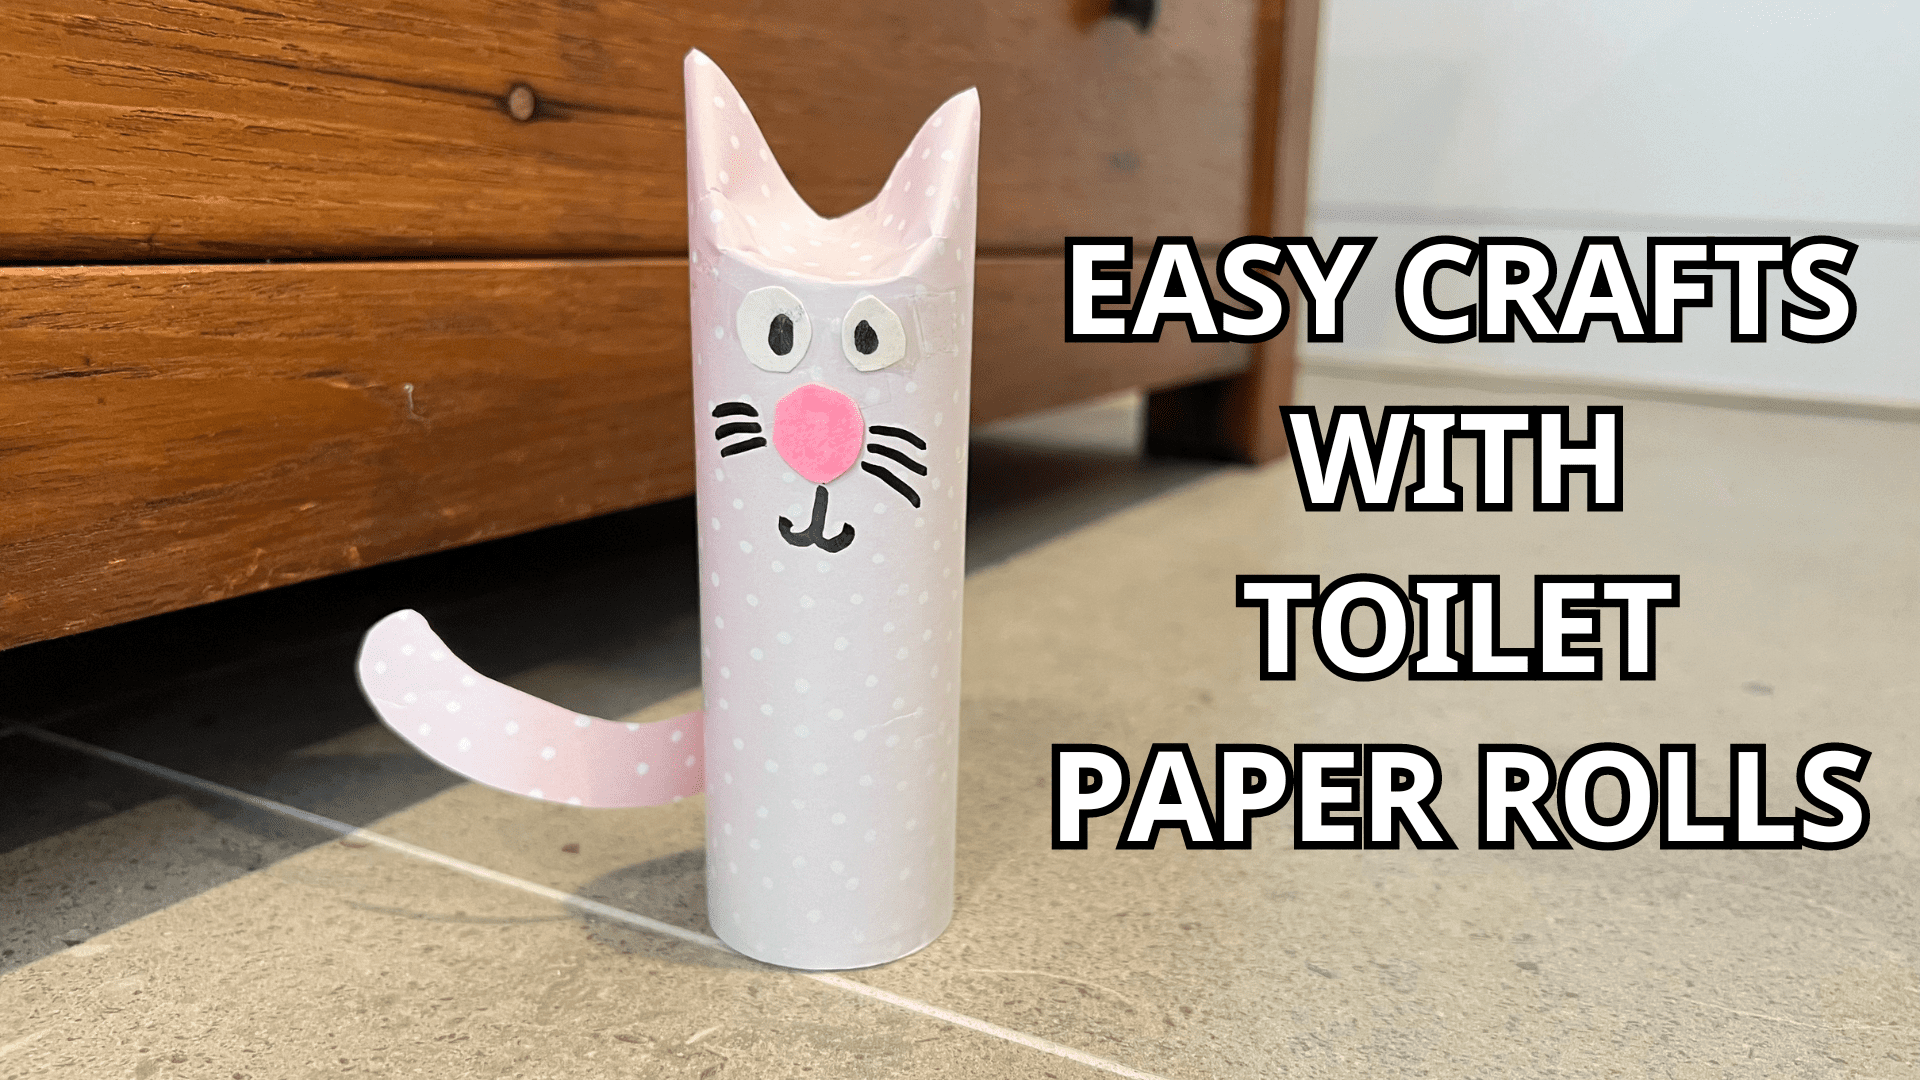 4 Easy Crafts for Kids with Toilet Paper Rolls